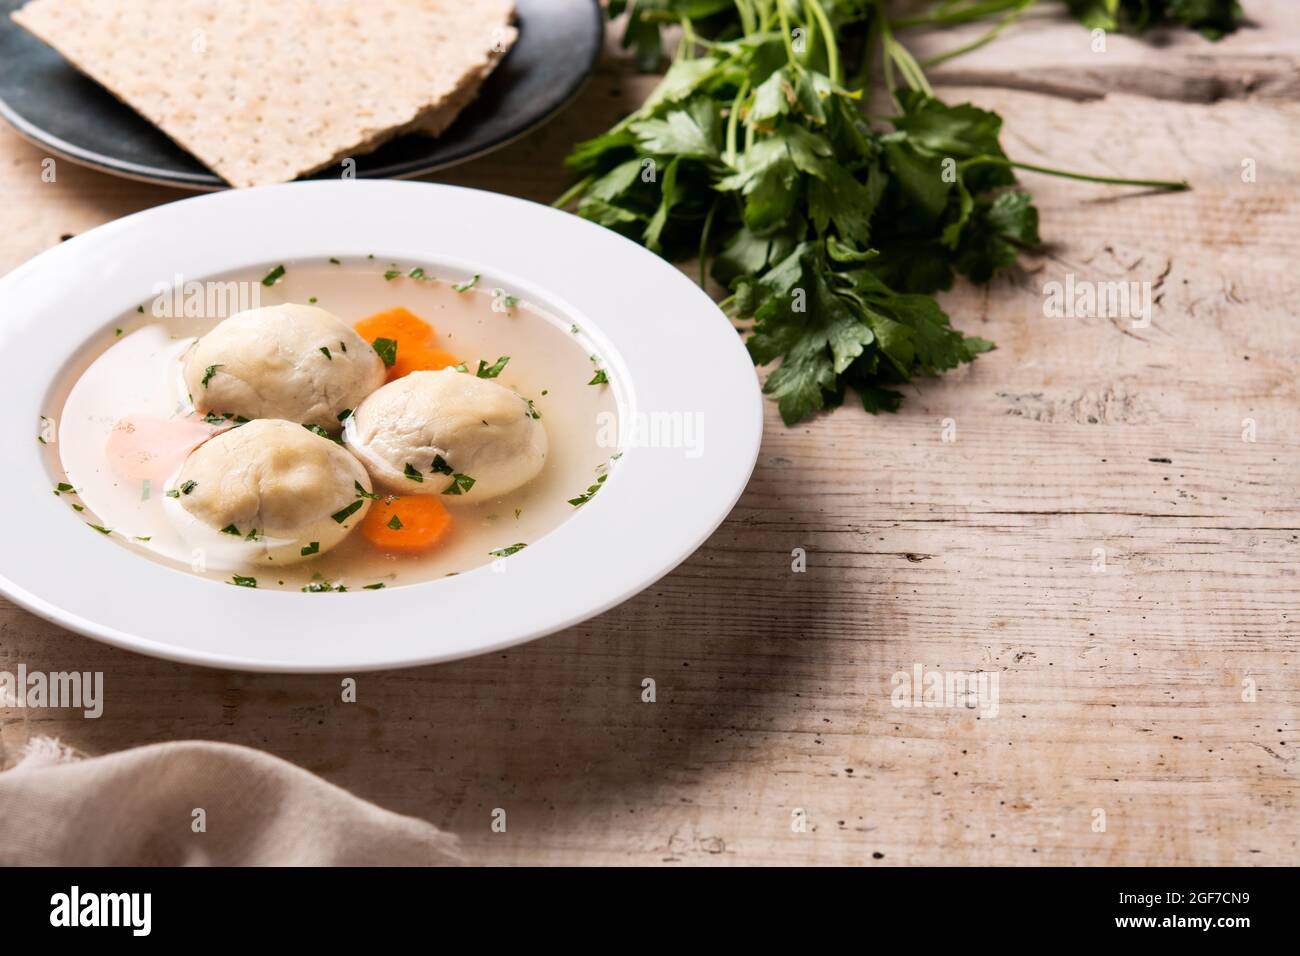 Traditional Jewish matzo ball soup on wooden table Stock Photo